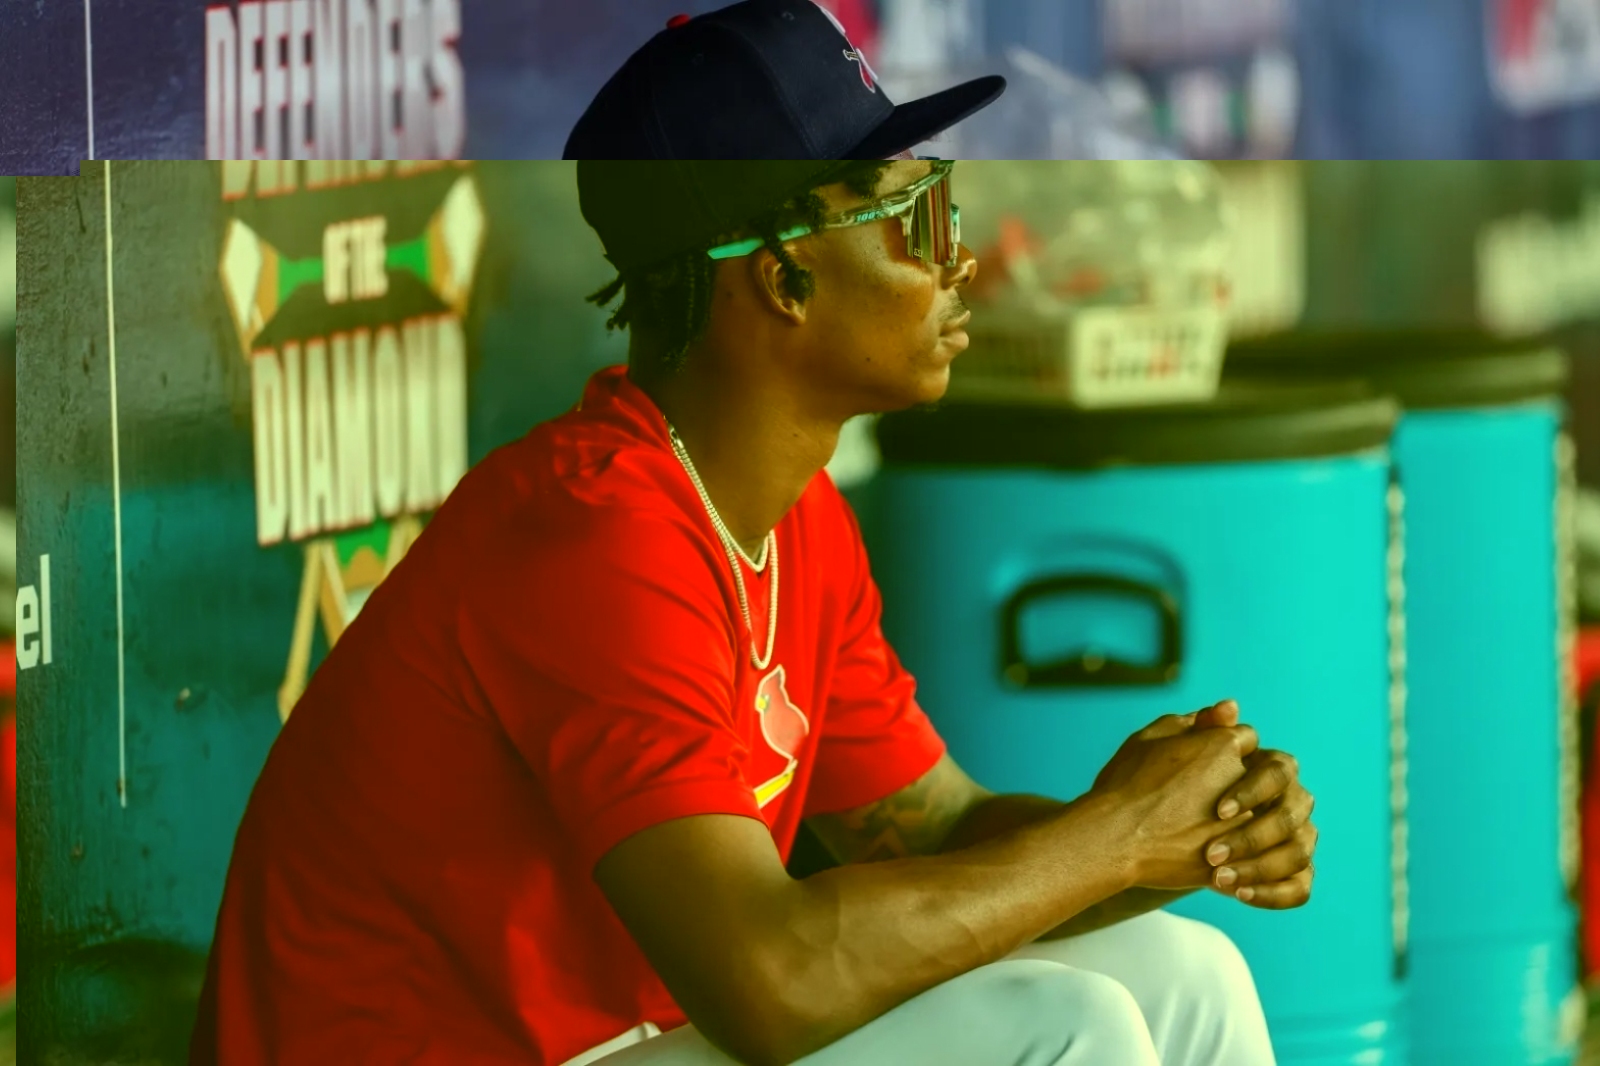 Springfield Cardinals pitcher Tink Hence sits in a dugout at Hammons Field in Springfield, Missouri.